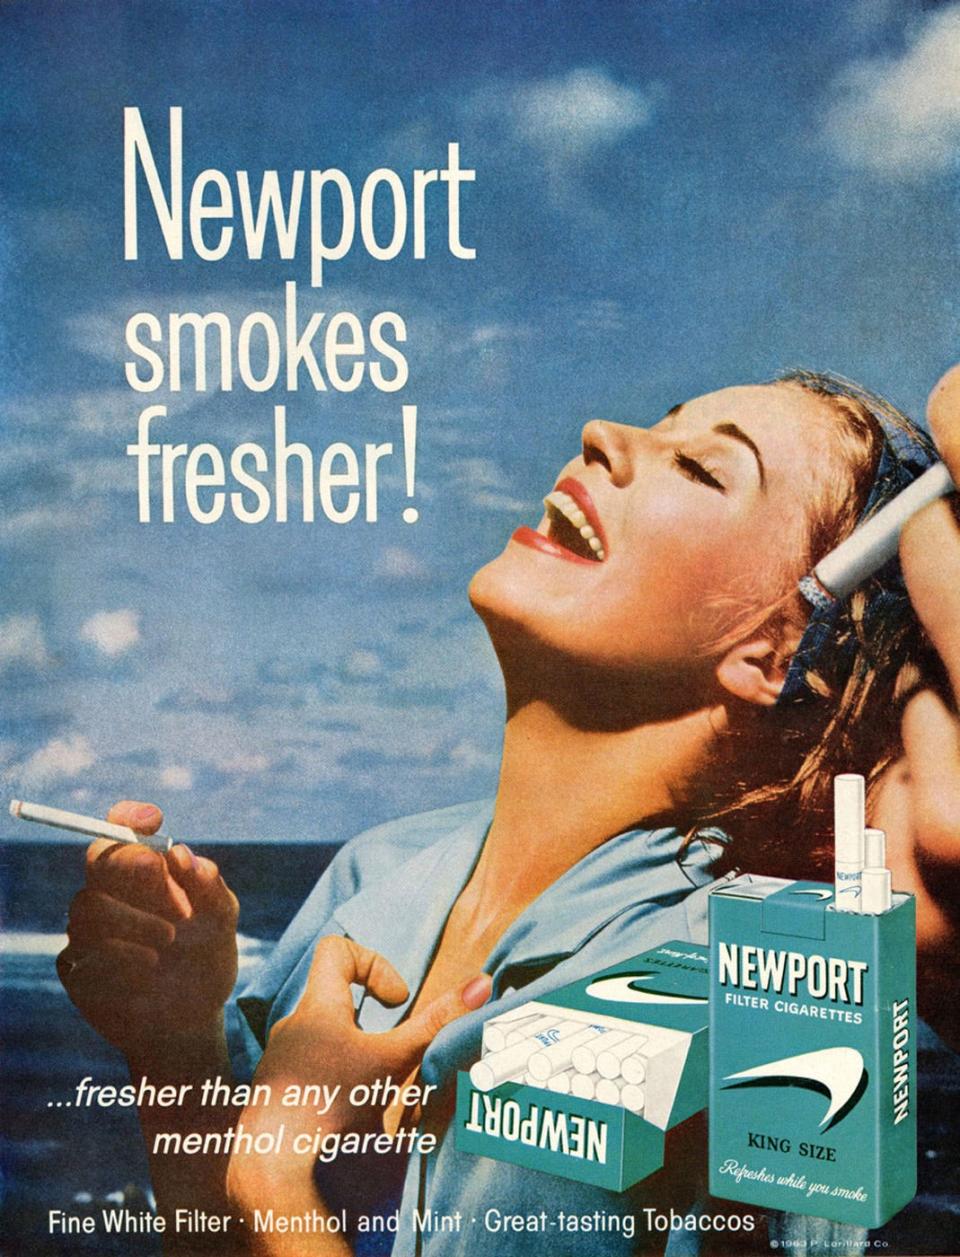 Newport Classics cigarette 1963 advertisement. The U.S. Food and Drug Administration announced April 28, 2022, a long-awaited proposal to remove menthol cigarettes from the shelves.